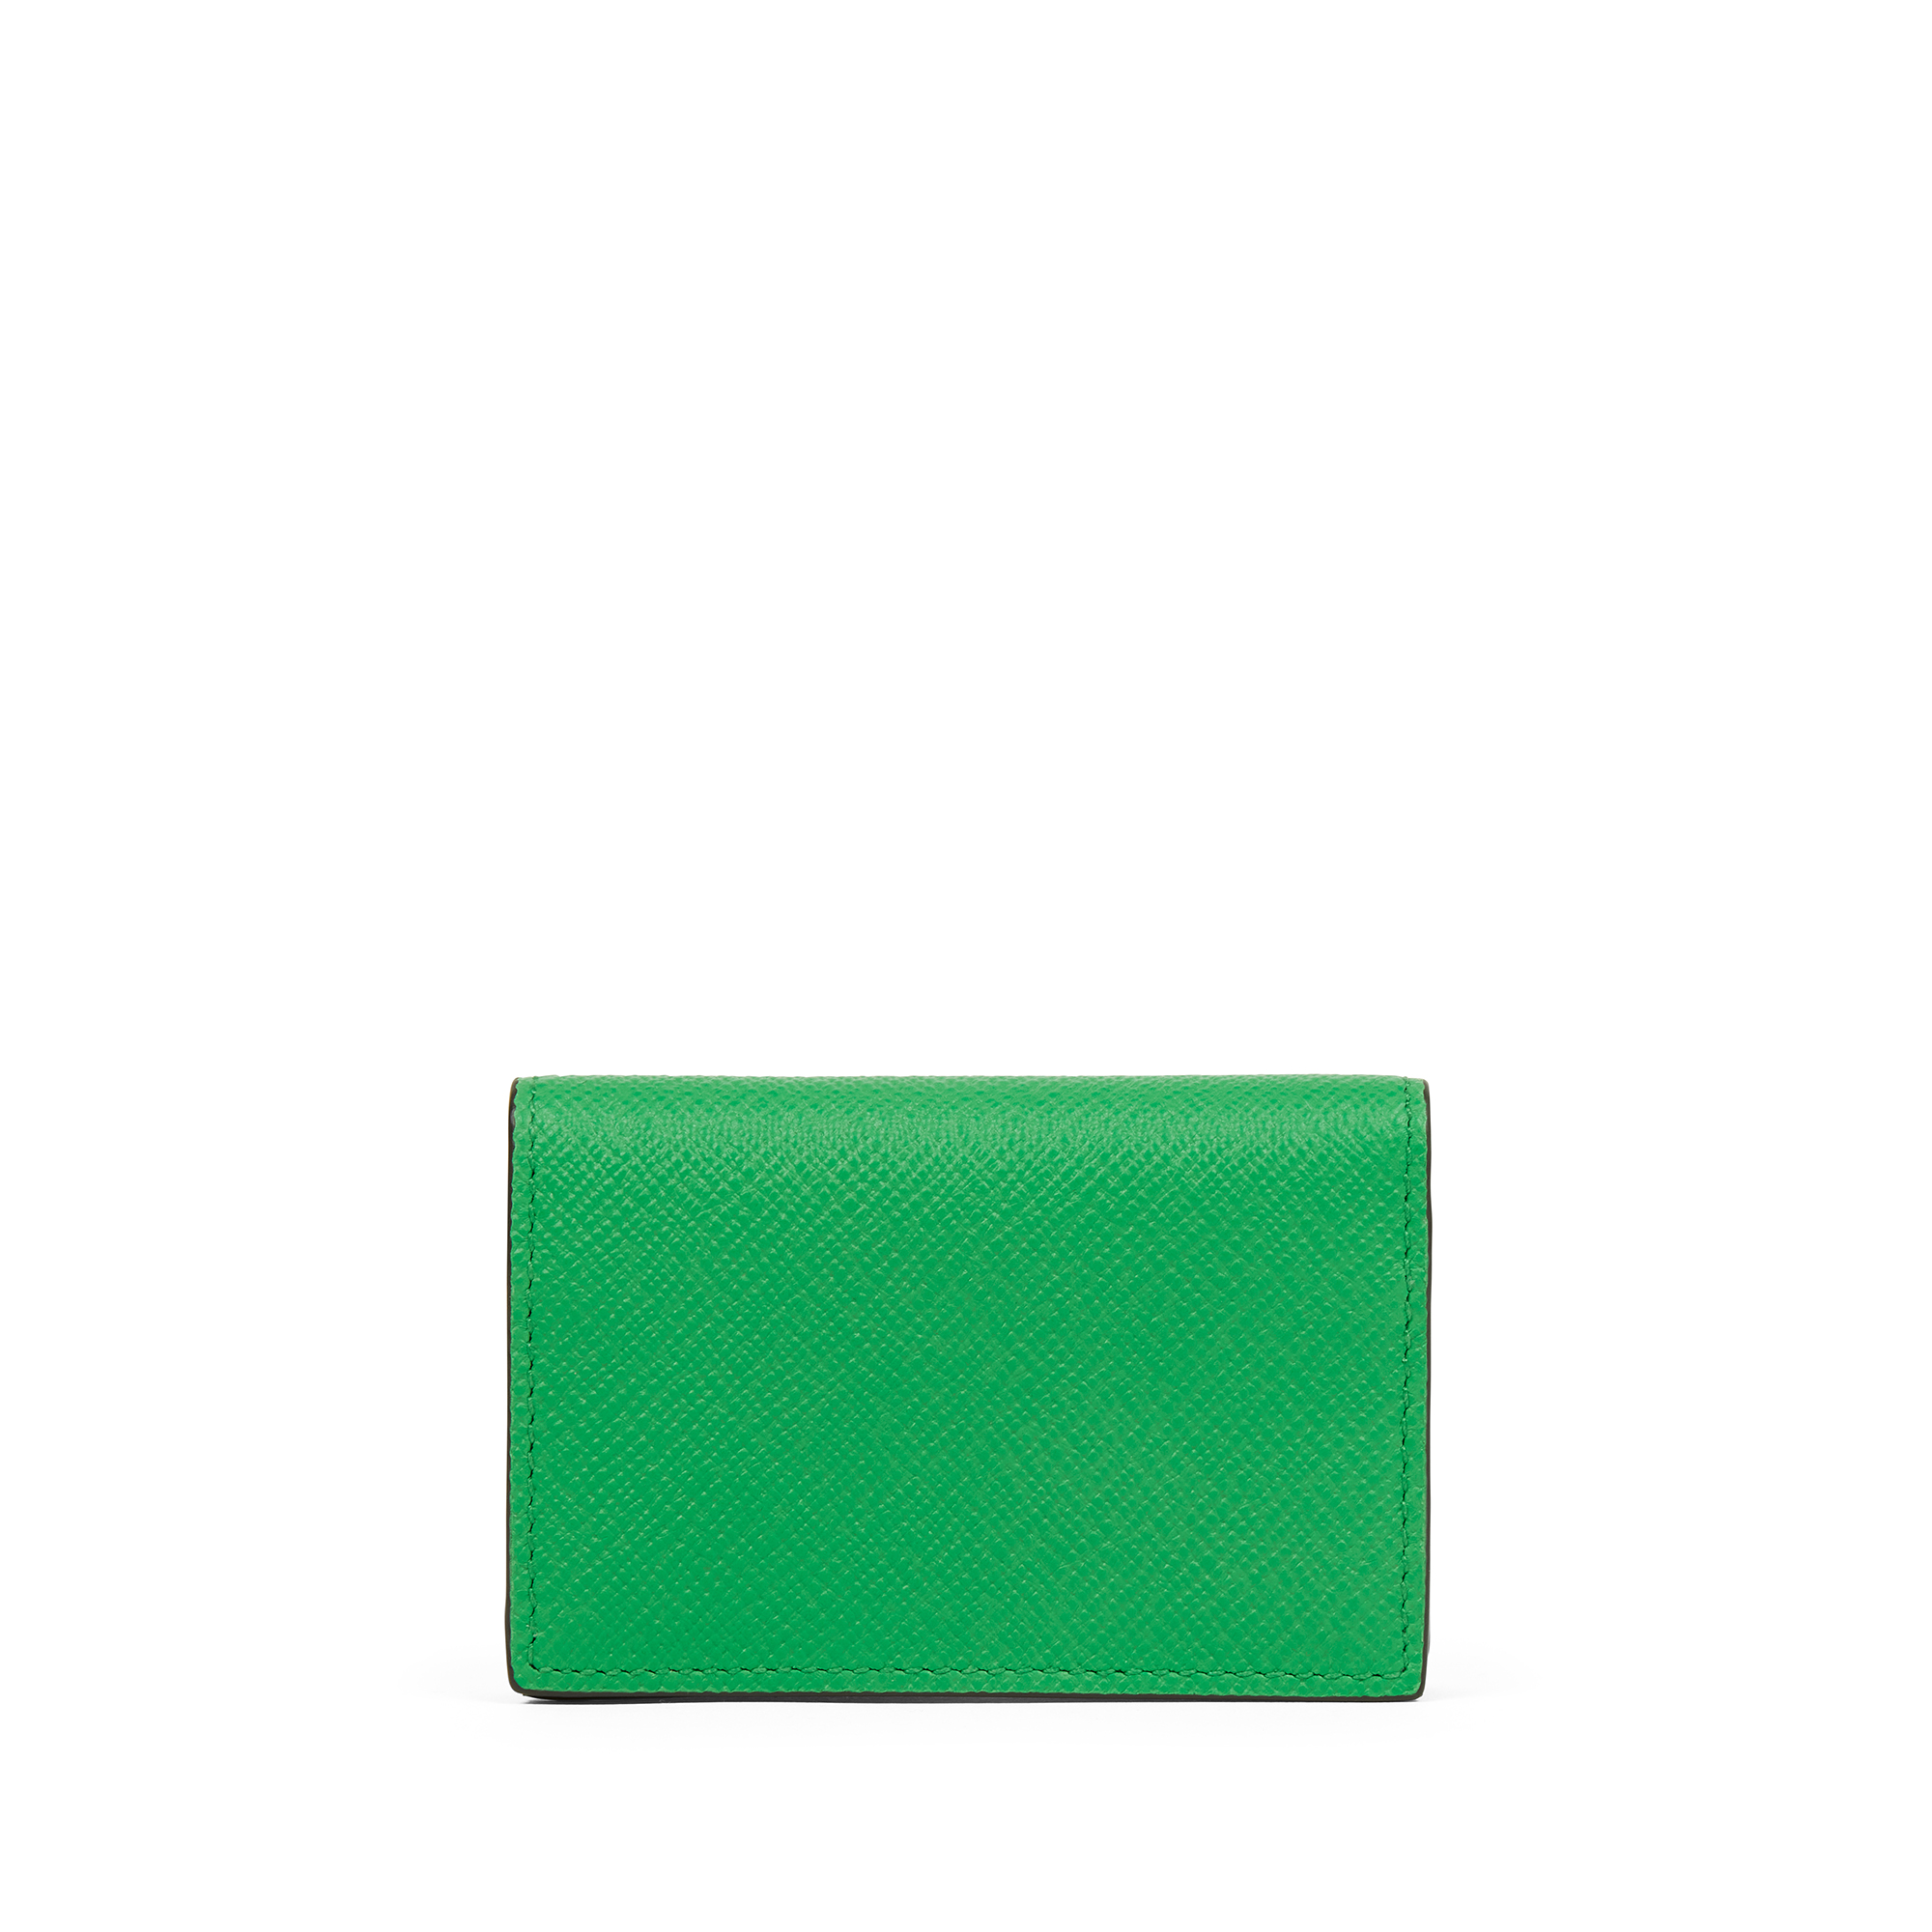 Smythson Folded Card Case With Snap Closure In Panama In Bright Emerald